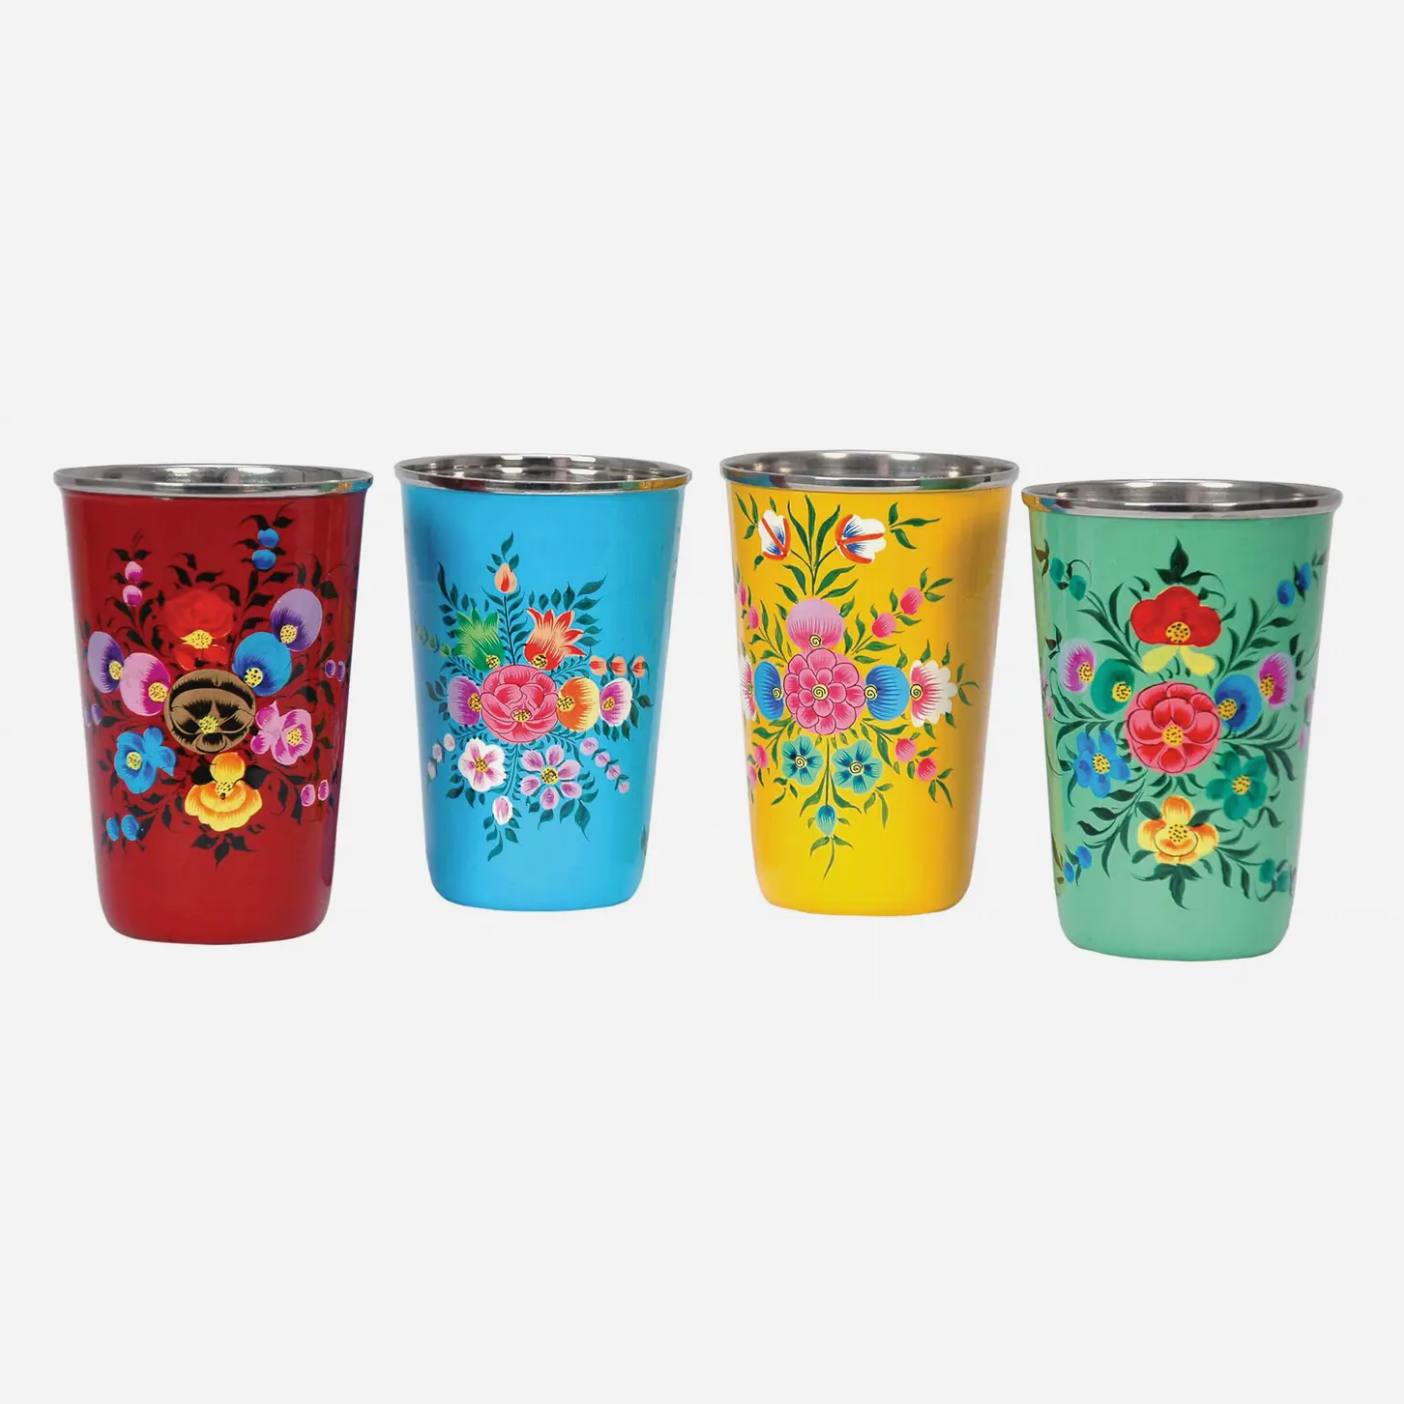 Hand Painted Stainless Steel Cups, Set of 4